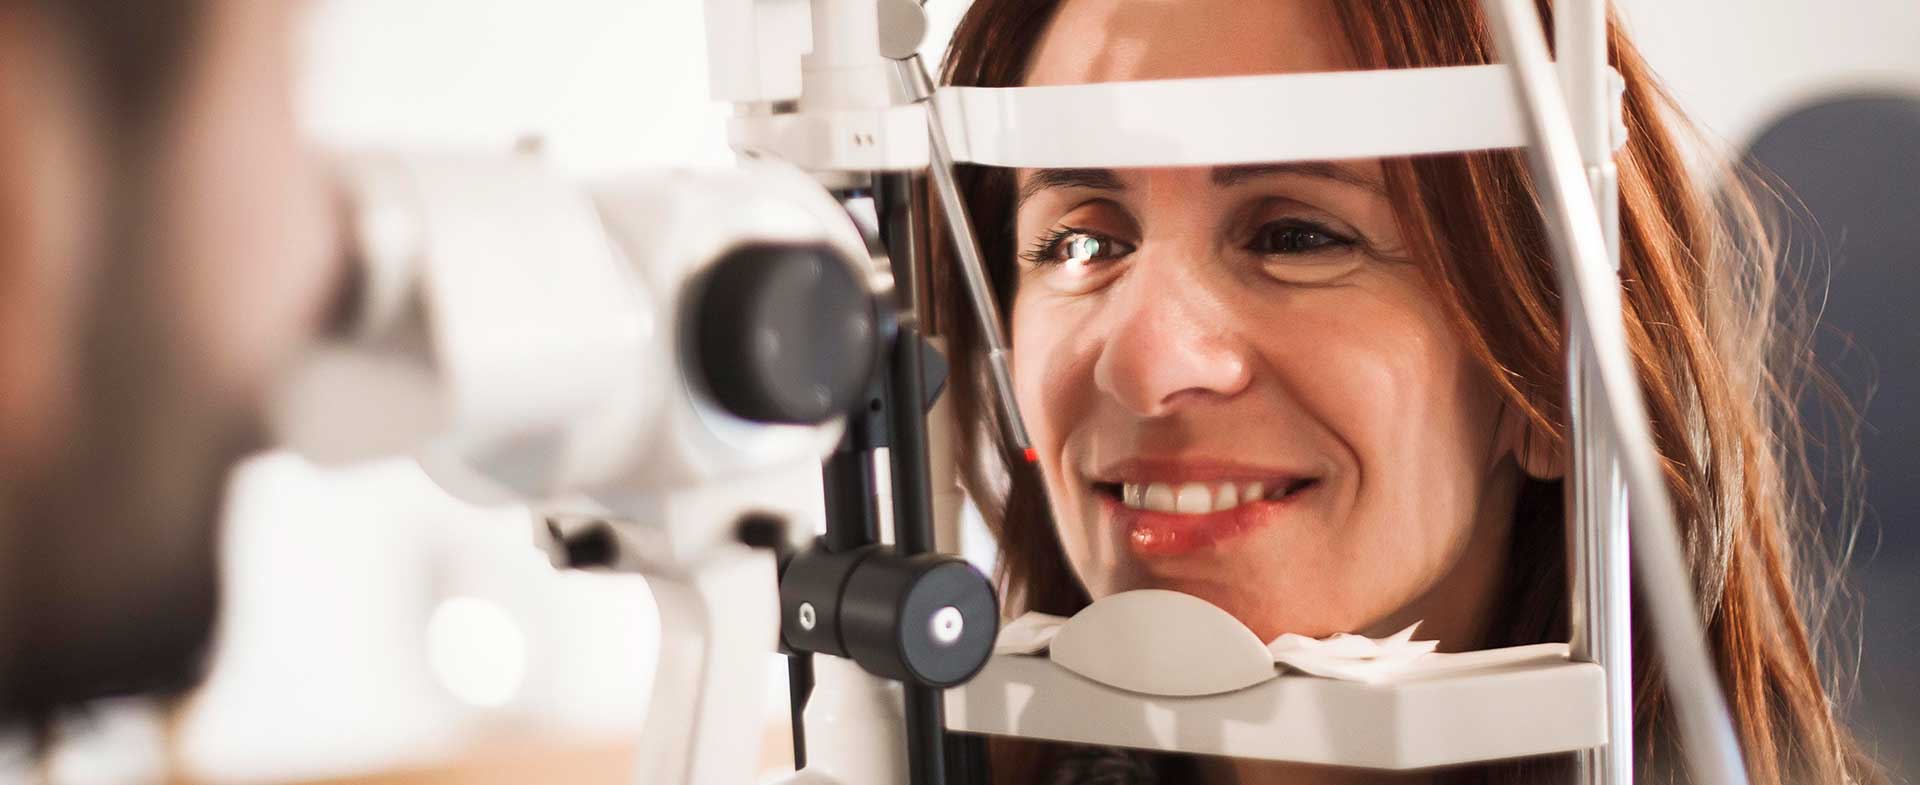 Woman over age 40 getting an eye exam 